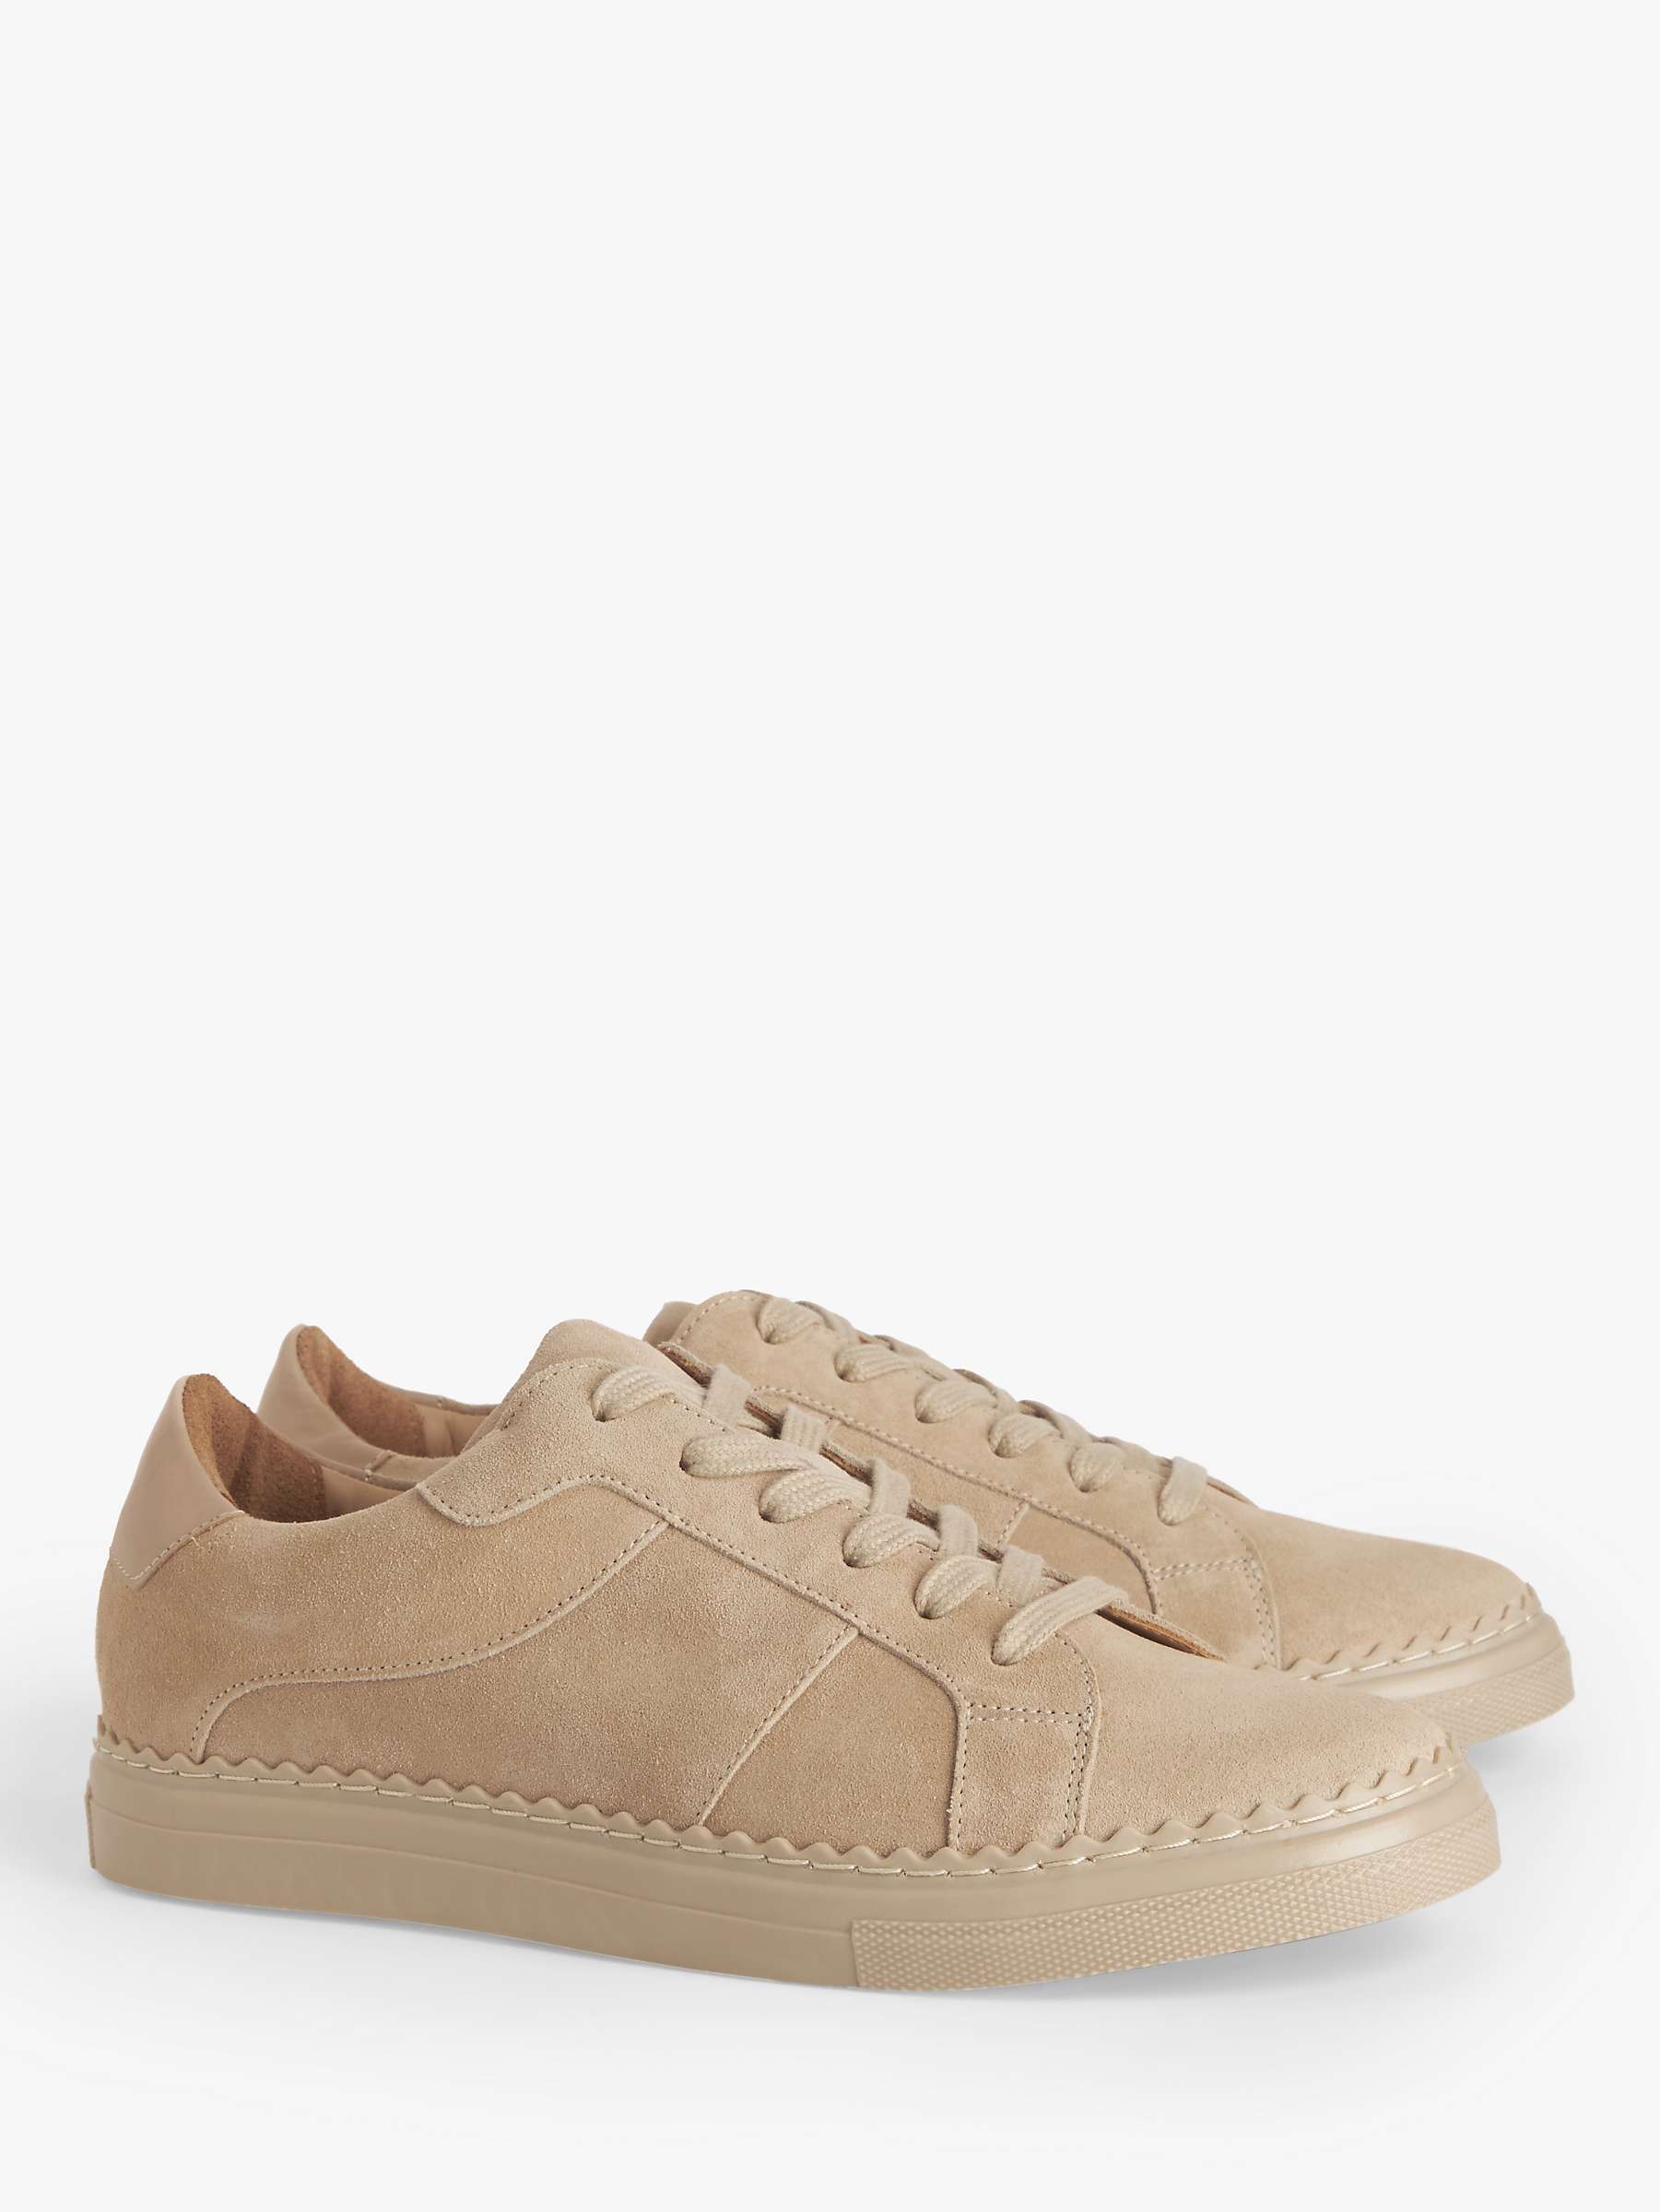 Buy John Lewis Freya Suede Lace Up Trainers, Nude Online at johnlewis.com